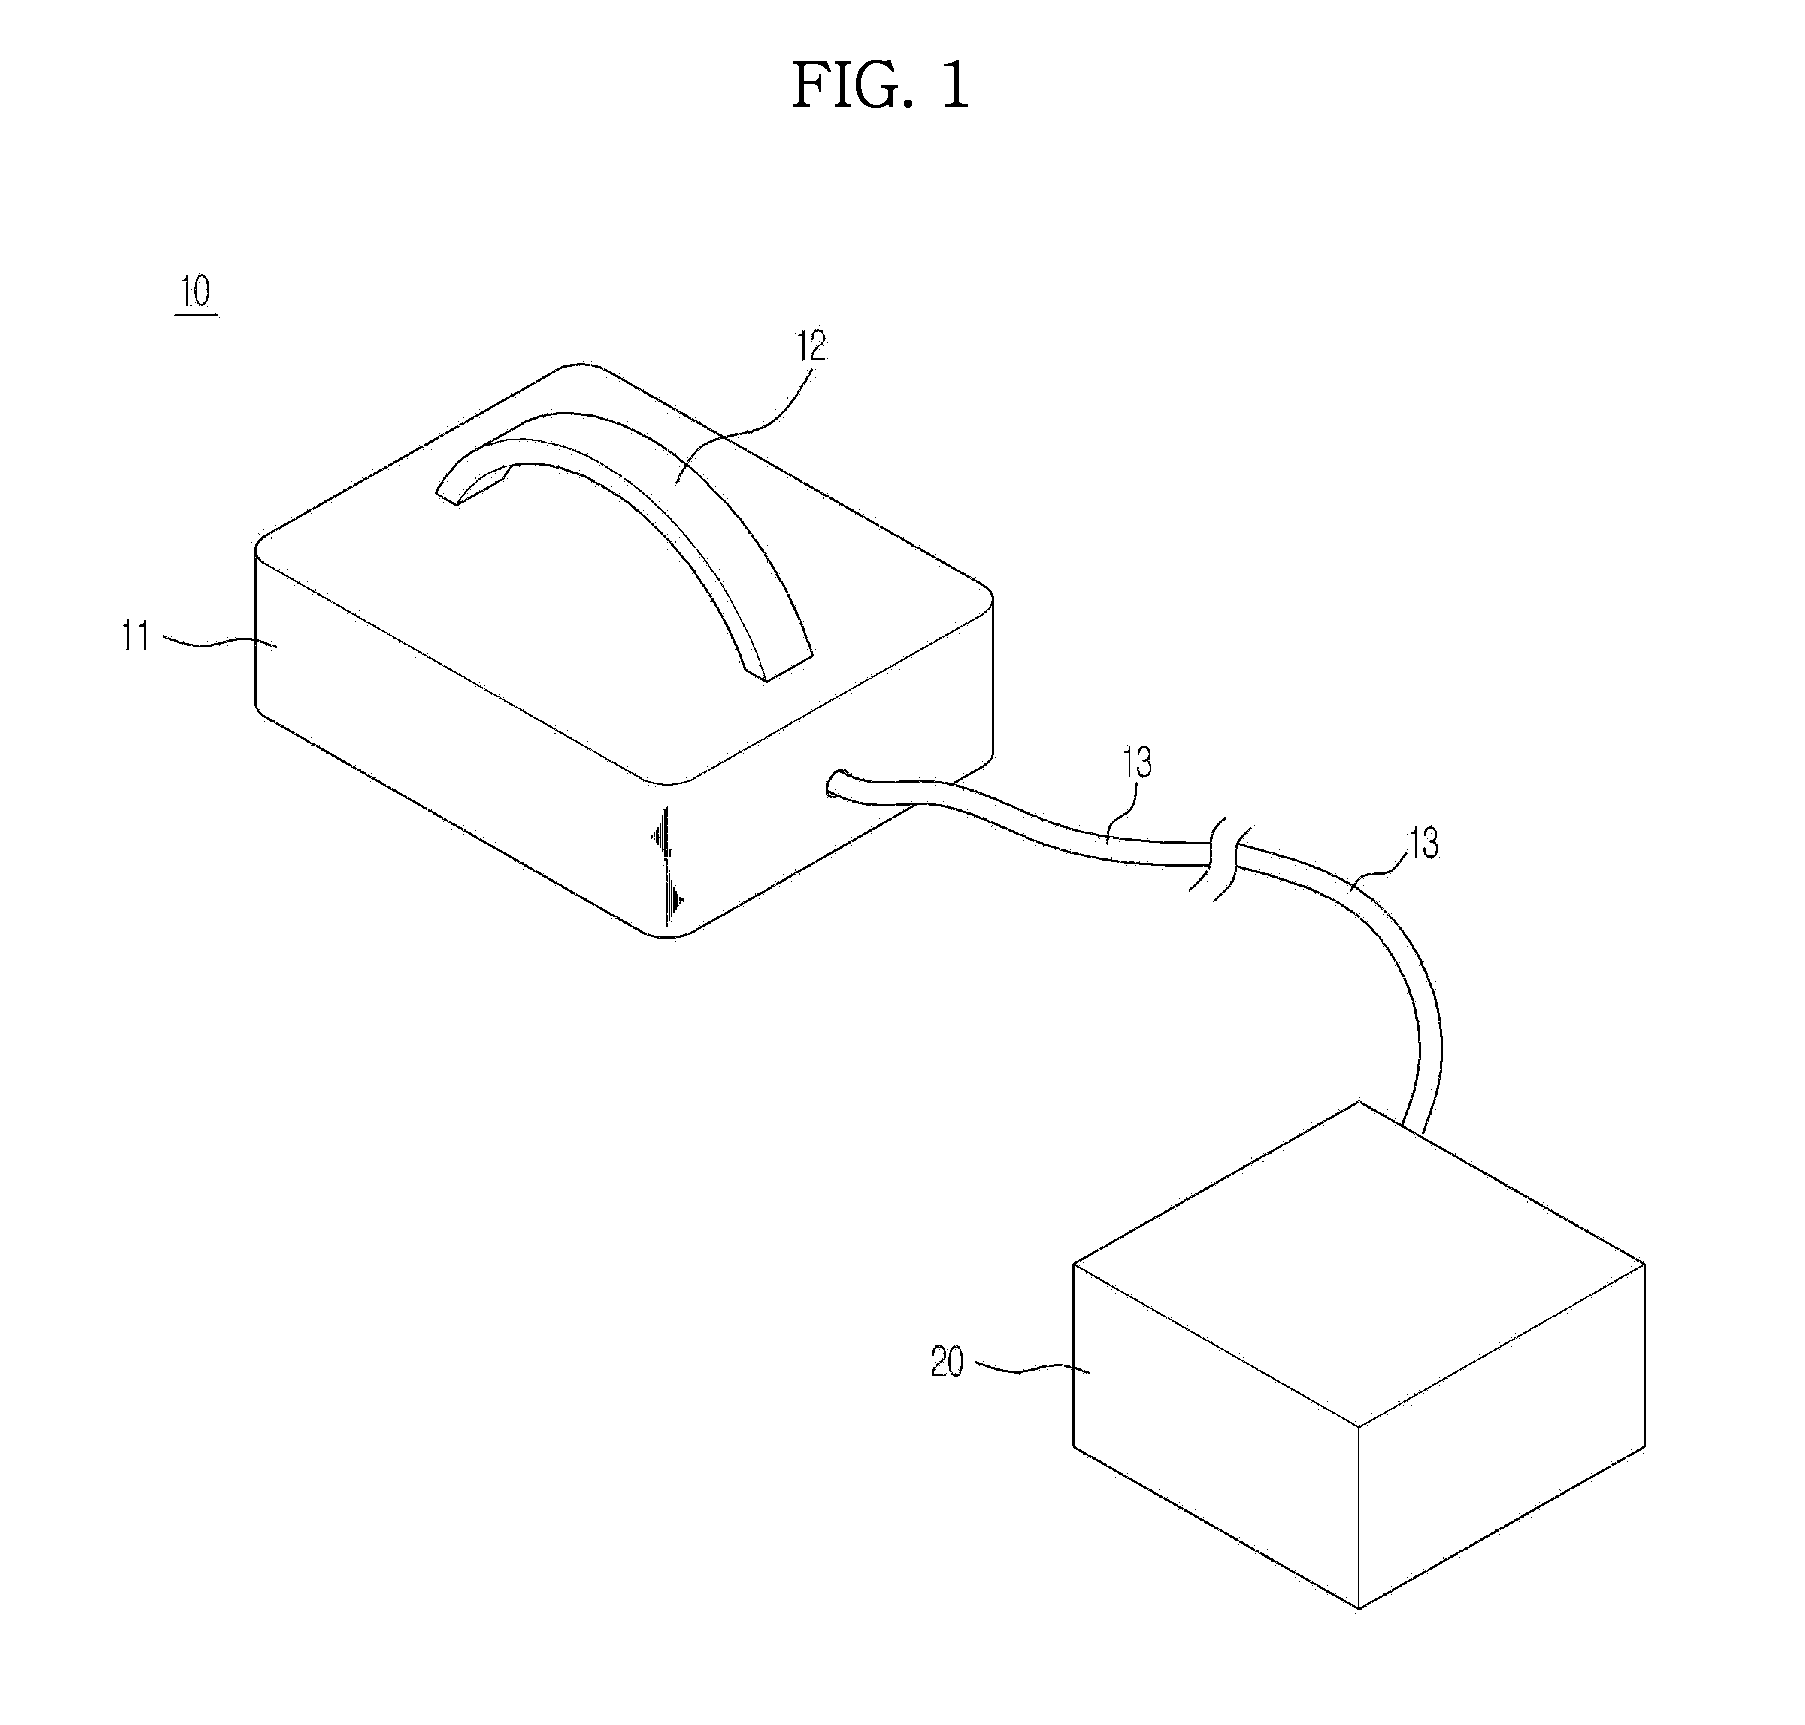 Thermal insulation performance measurement apparatus and measurement method using the same